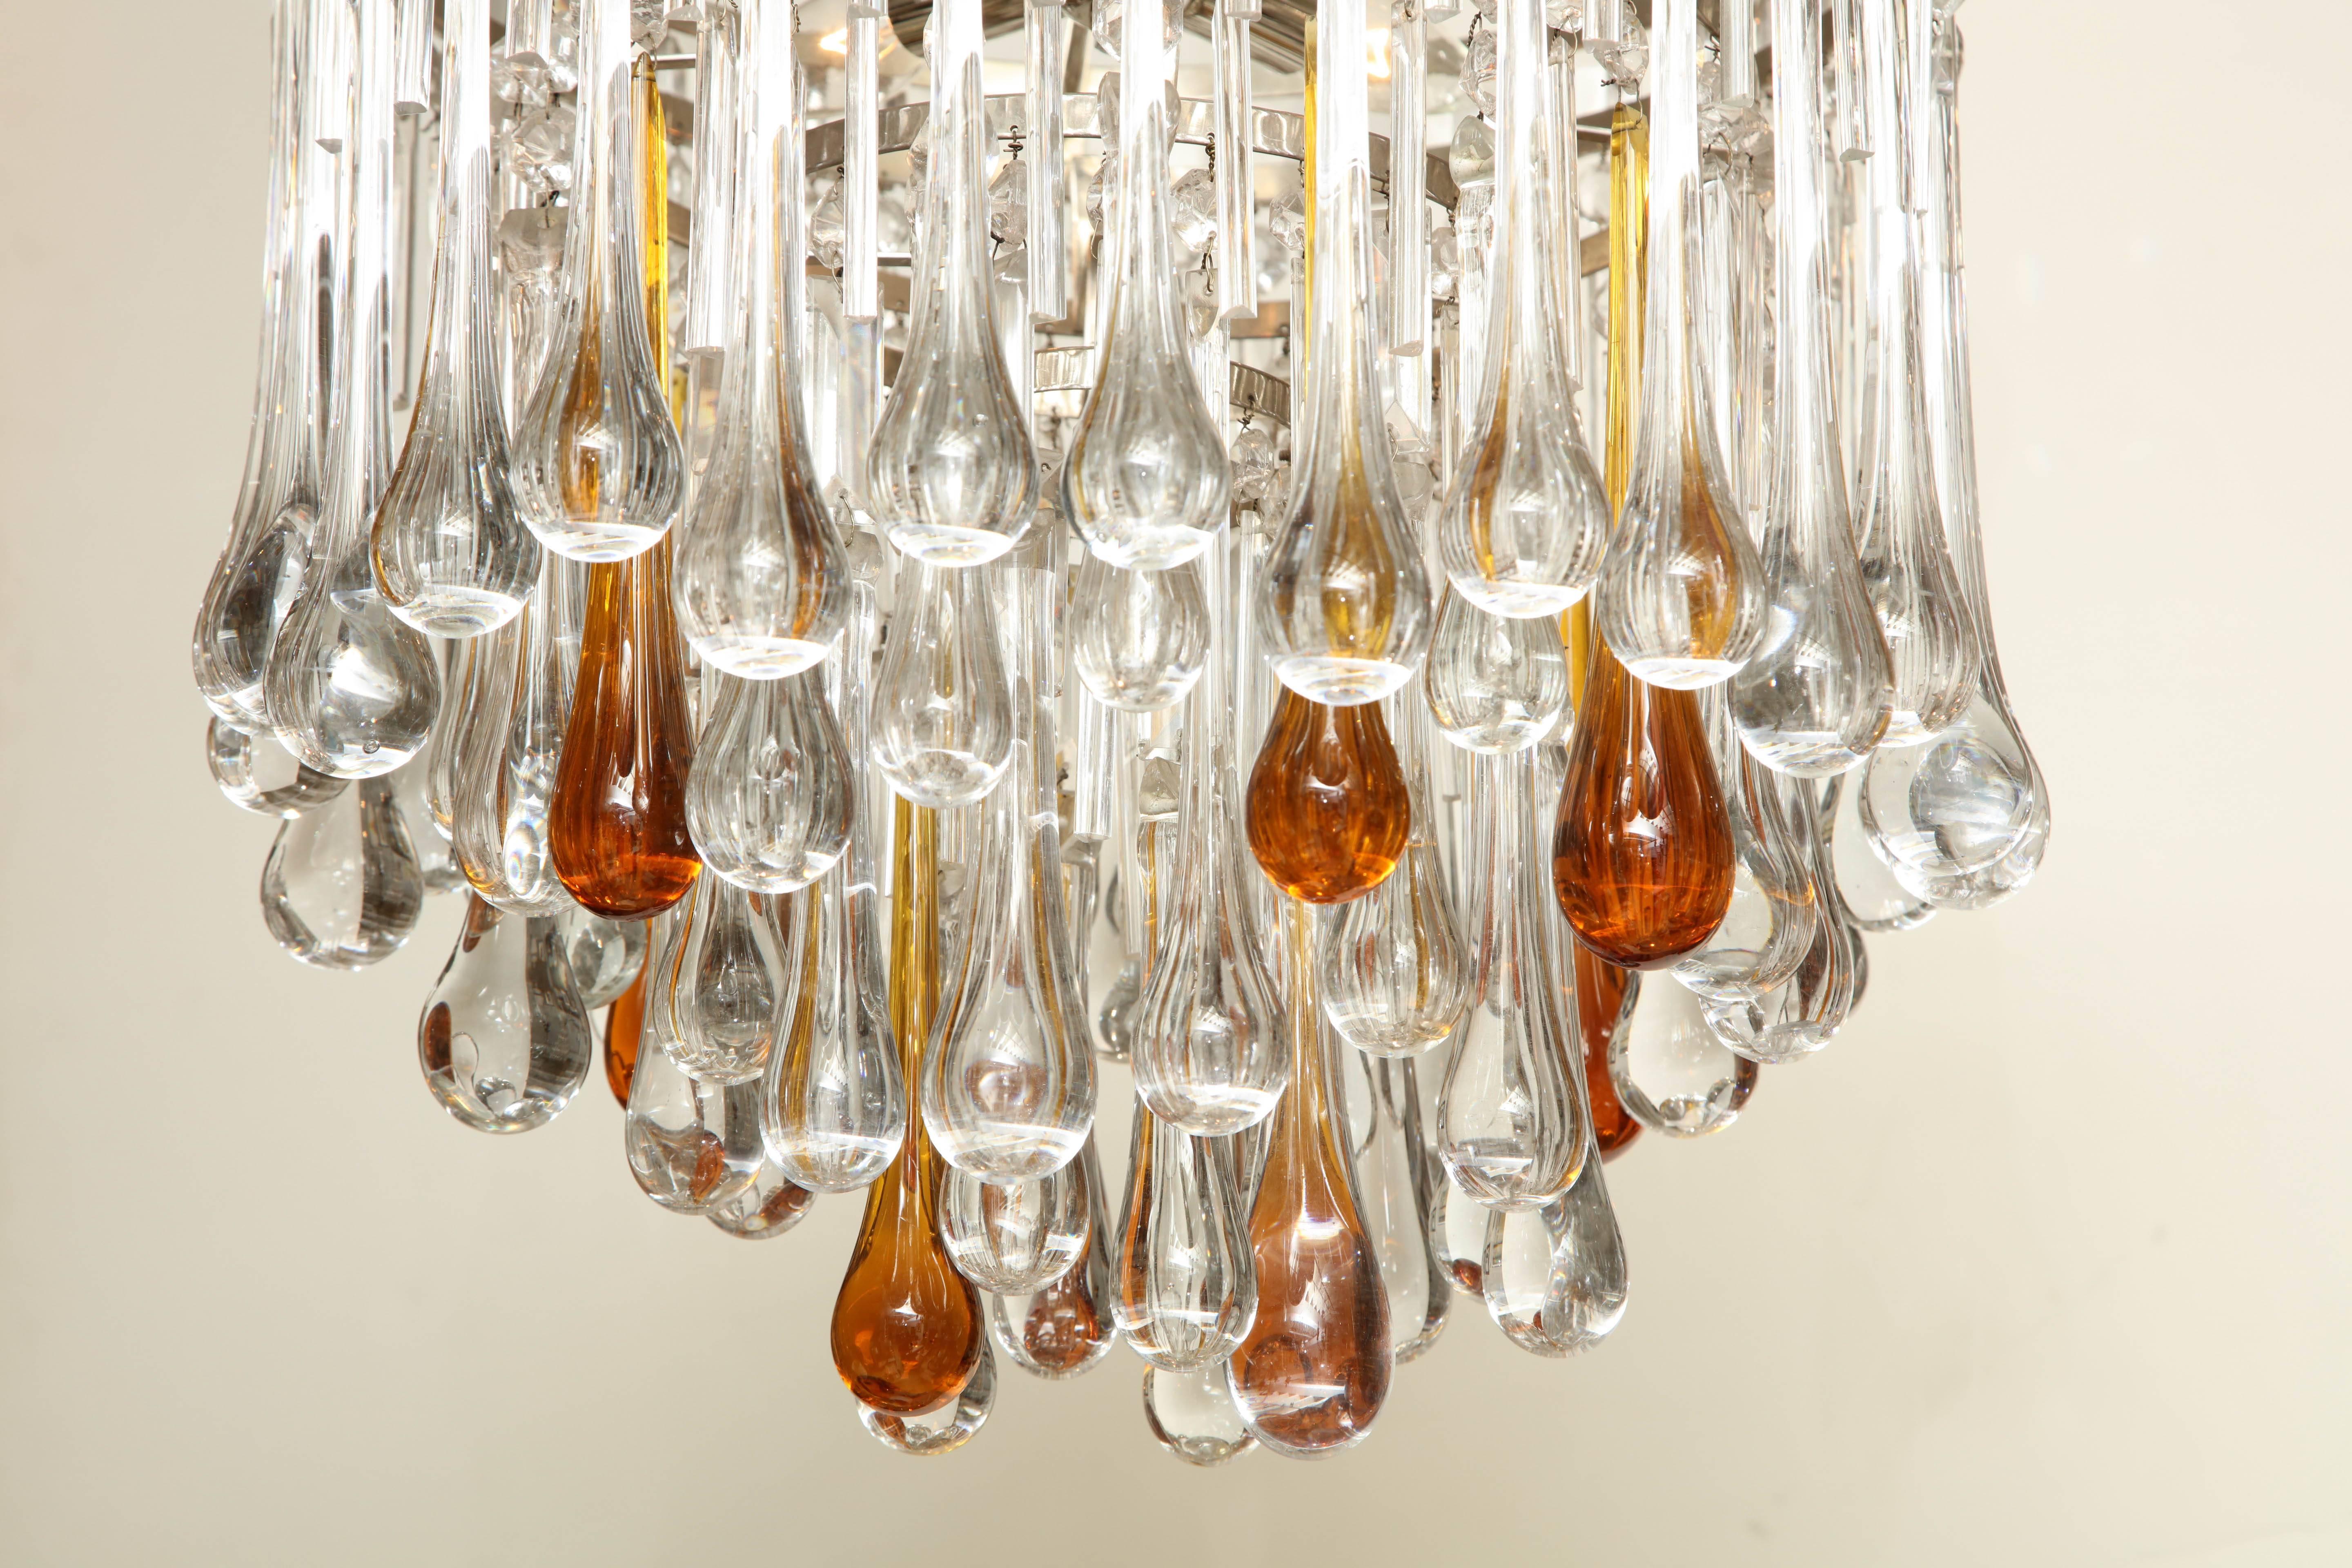 A round Murano glass chandelier with clear and amber colored crystal tear drops. Recently rewired for US specifications.




Available to see in our NYC Showroom 
BK Antiques
306 East 61st St. 2nd fl.
New York, NY 10065